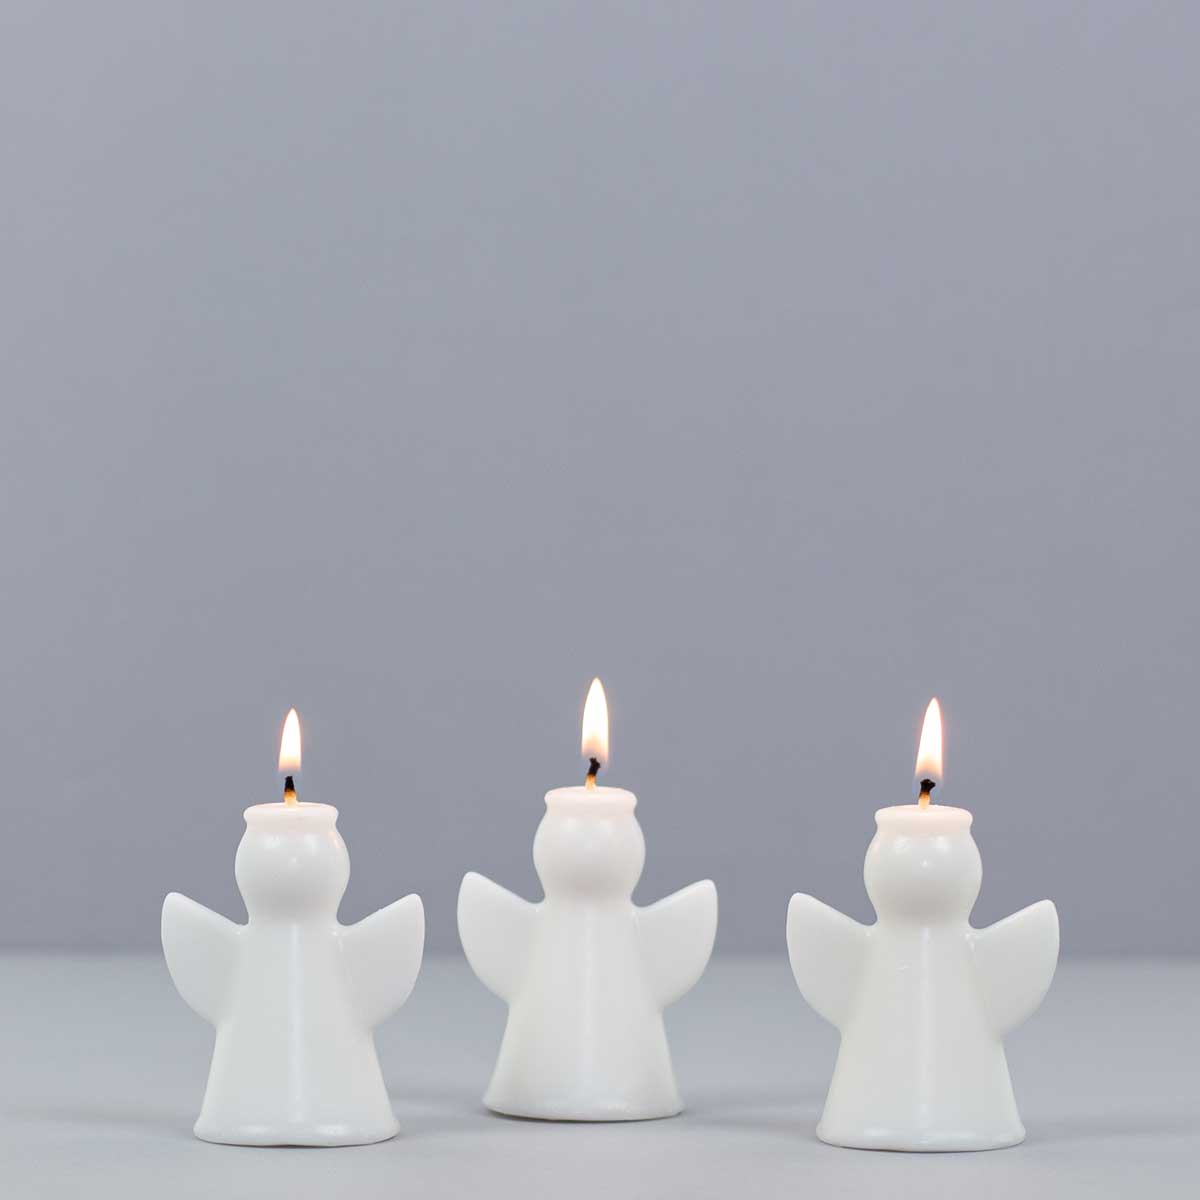 ANGEL Candle S, 3 pack